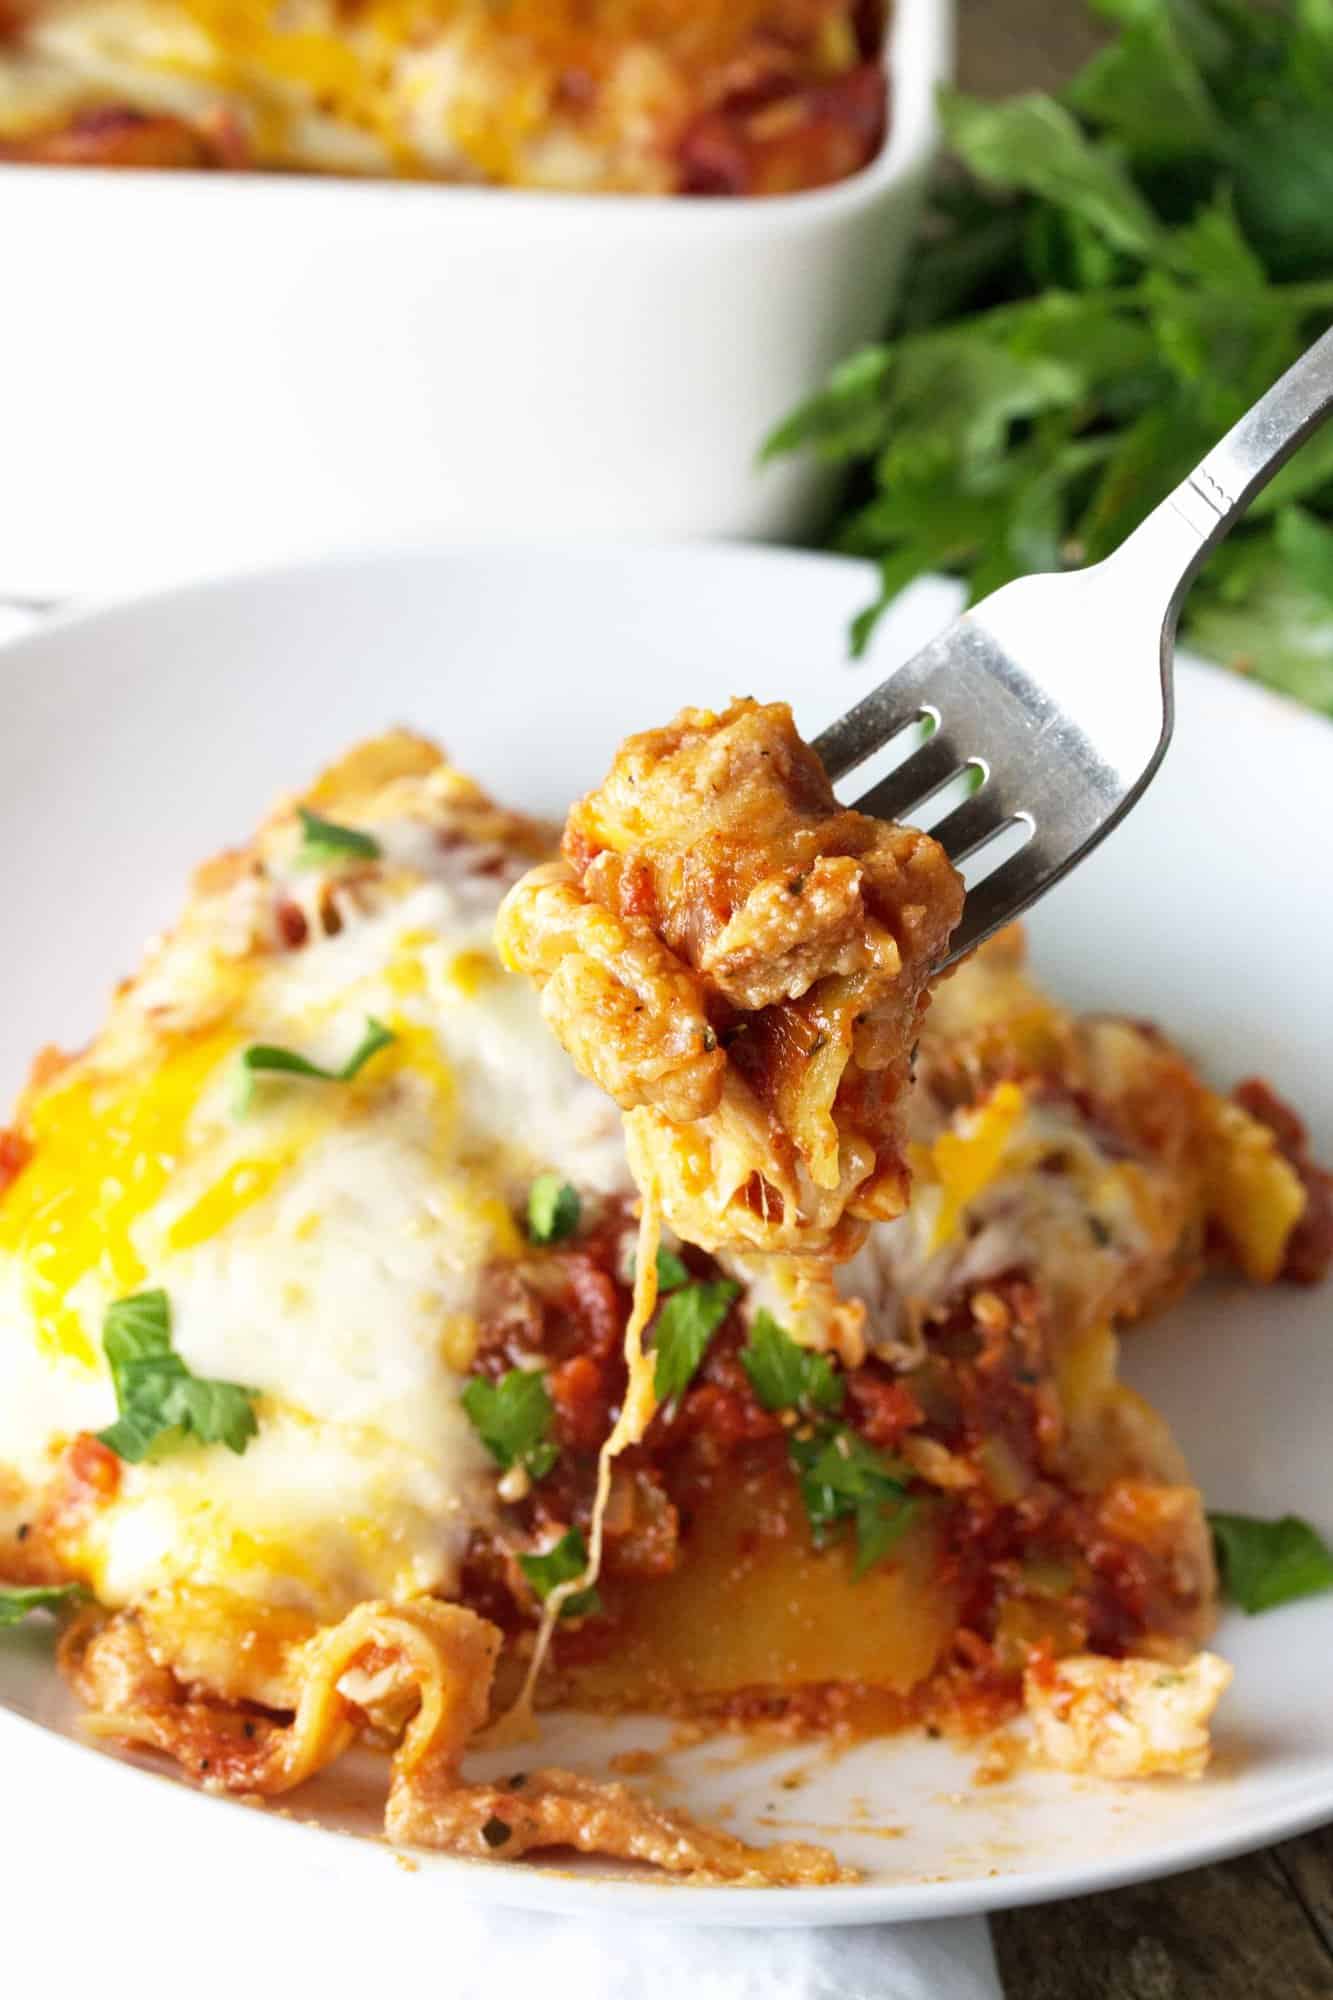 Spice things up with this Cajun Shrimp Lasagna! You'll be blown away with the flavor in this spicy Southern seafood version of lasagna.